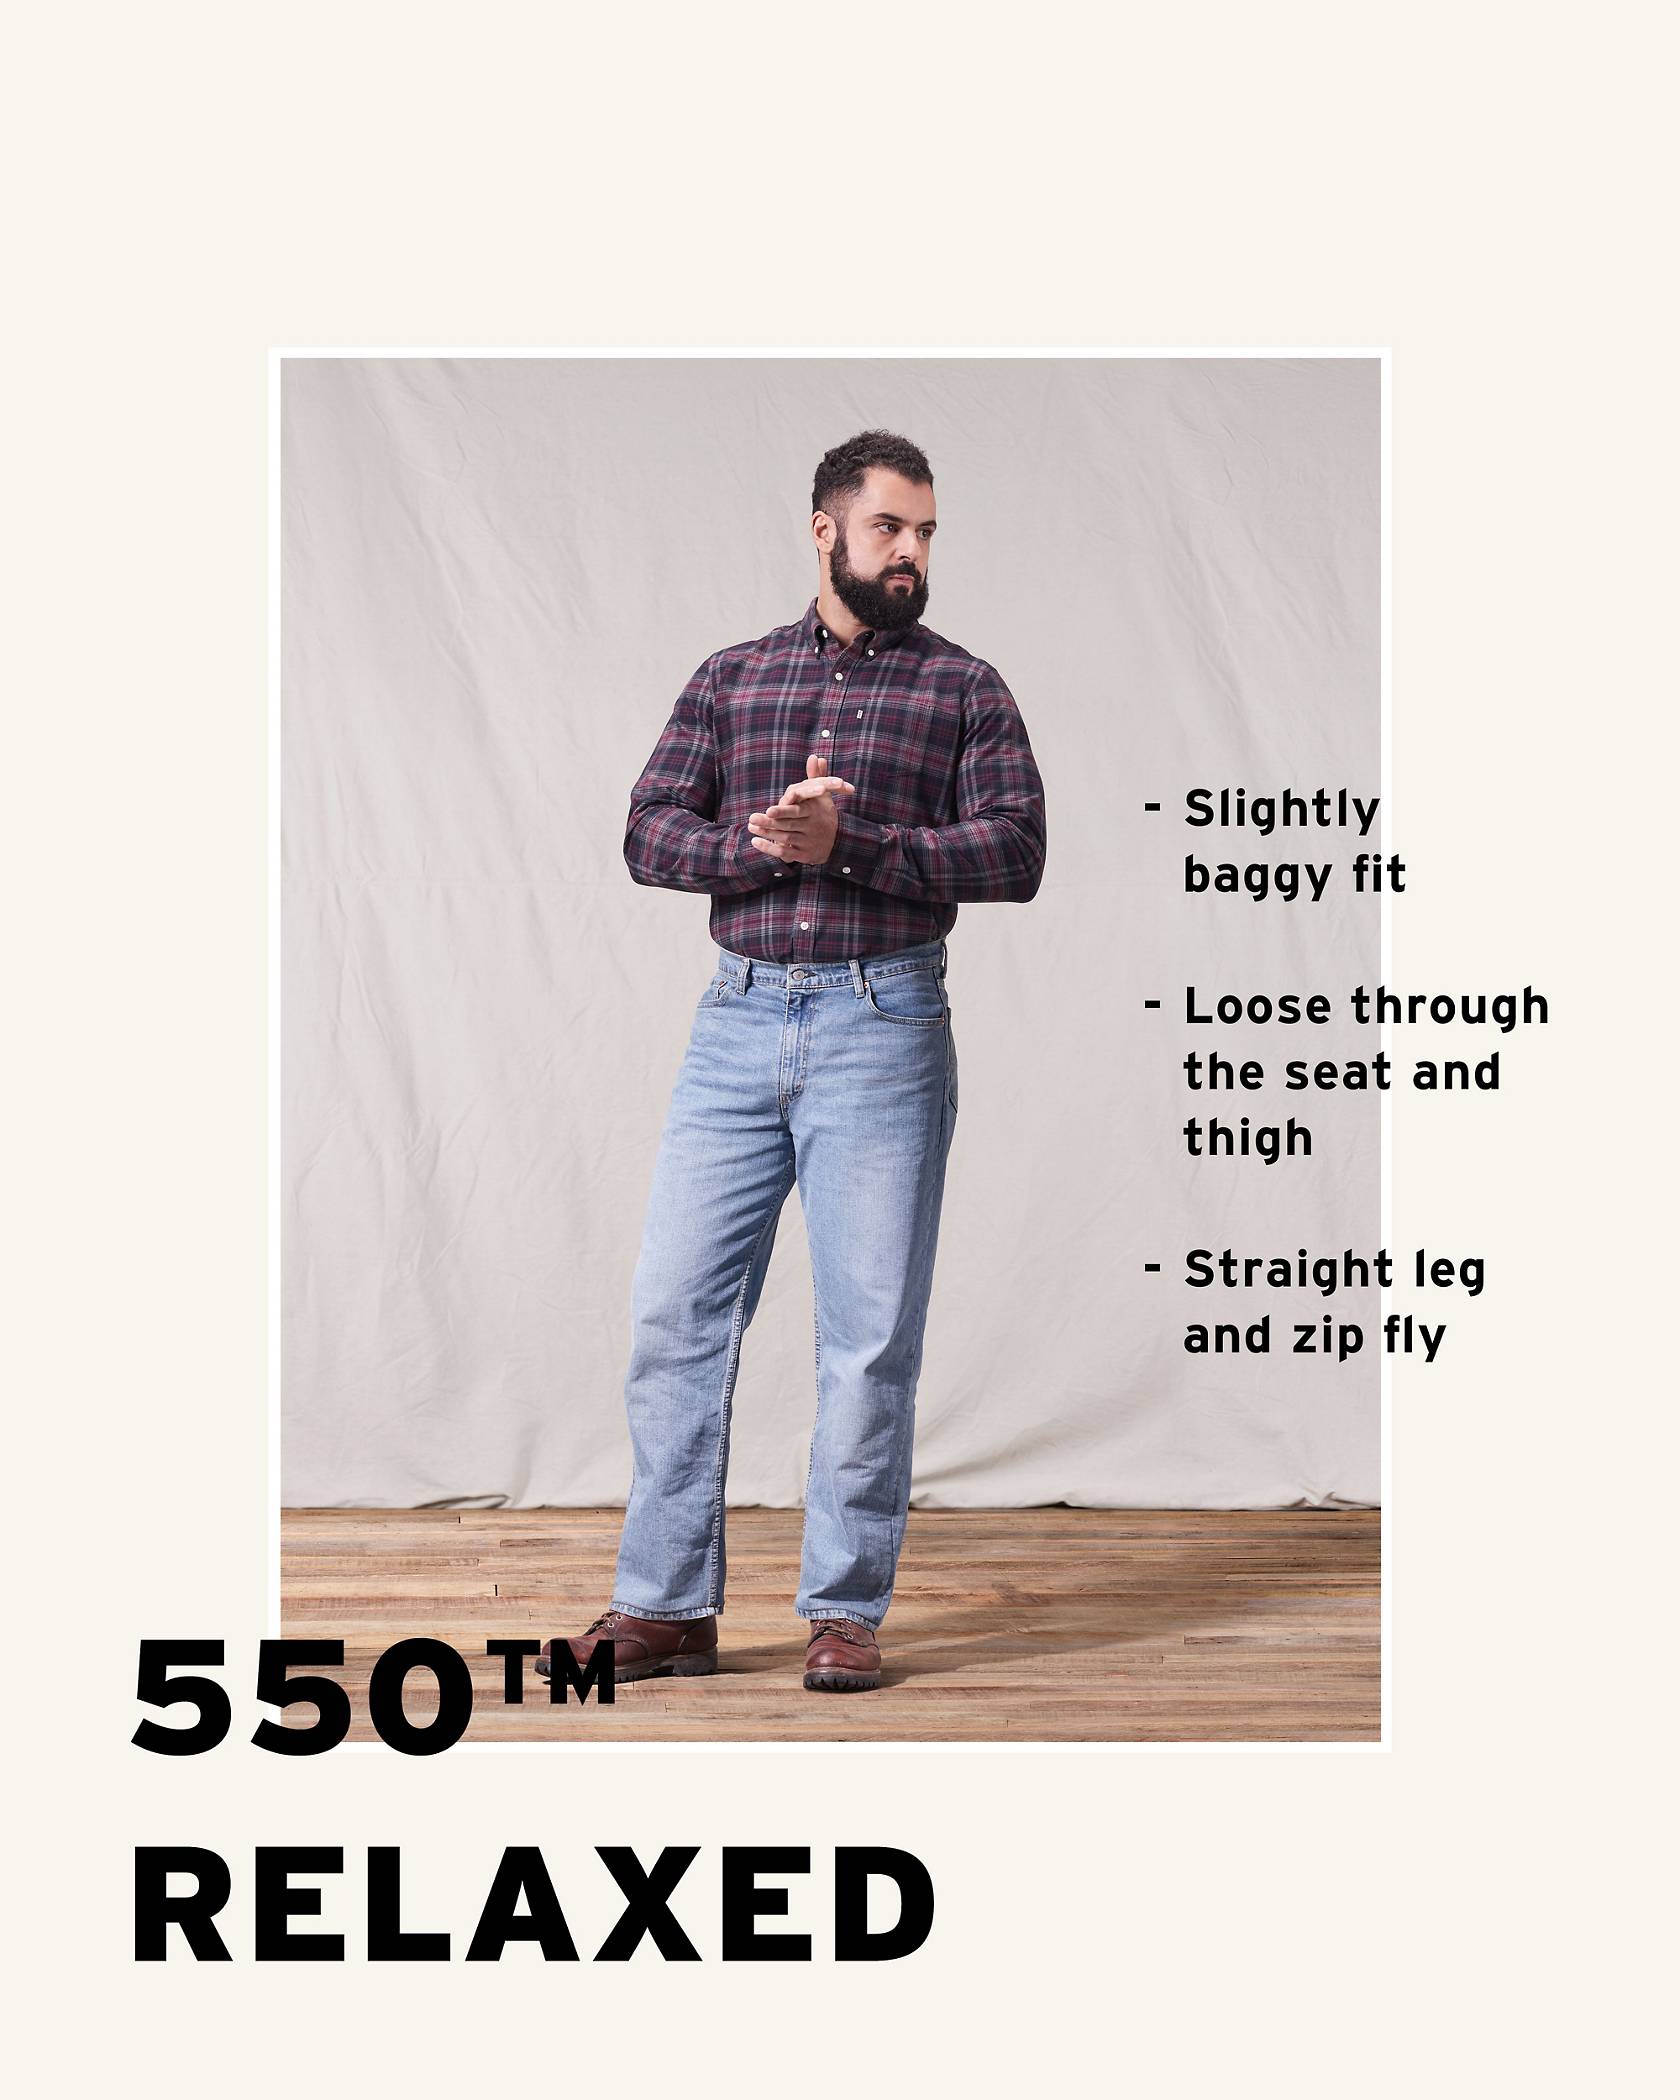 Model wearing a burgundy plaid shirt, 550™ Relaxed light wash jeans, and brown shoes while looking towards the left side of the camera.